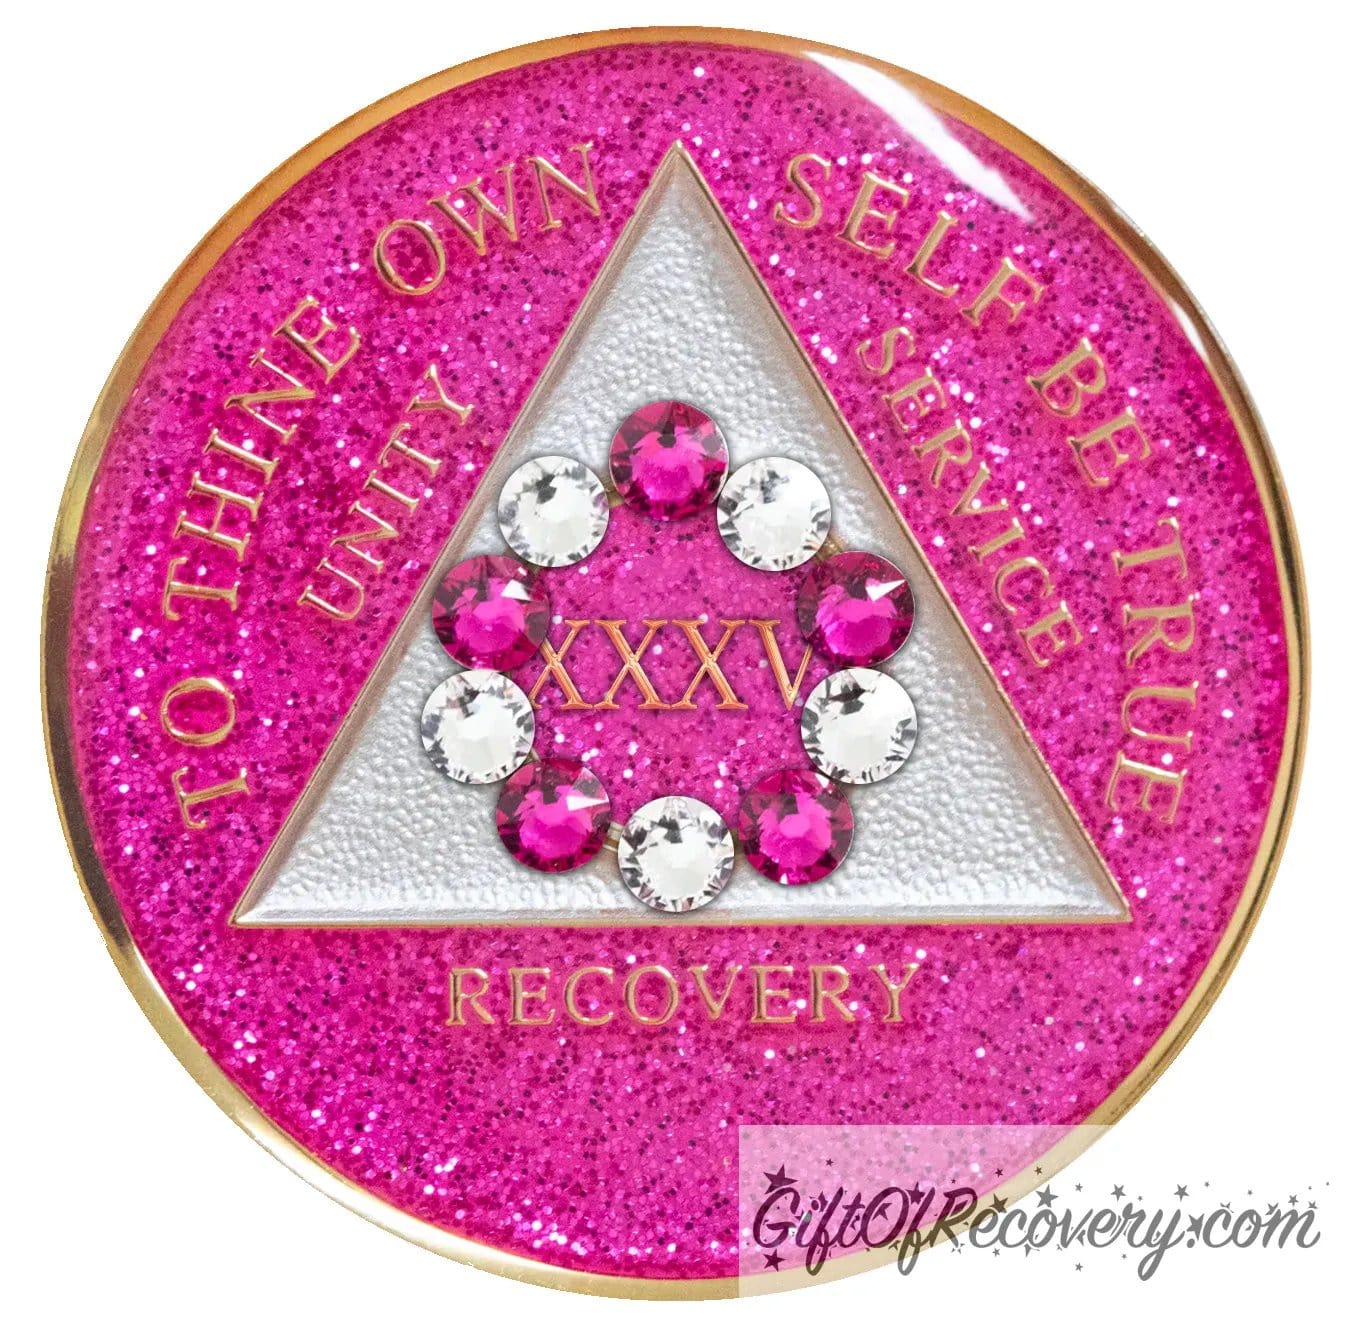 35 Year princess pink glitter 10th step AA medallion with 5 pink genuine crystals and 5 clear genuine crystal, formed in a circle around the year, to thine own self be true, triangle in the center and unity, service, recovery, along with rim of medallion are slightly raised in 14k gold, the center of the triangle is pearl white with the circle being pink glitter, all emphasizing action and reflection, for your favorite sober princess.